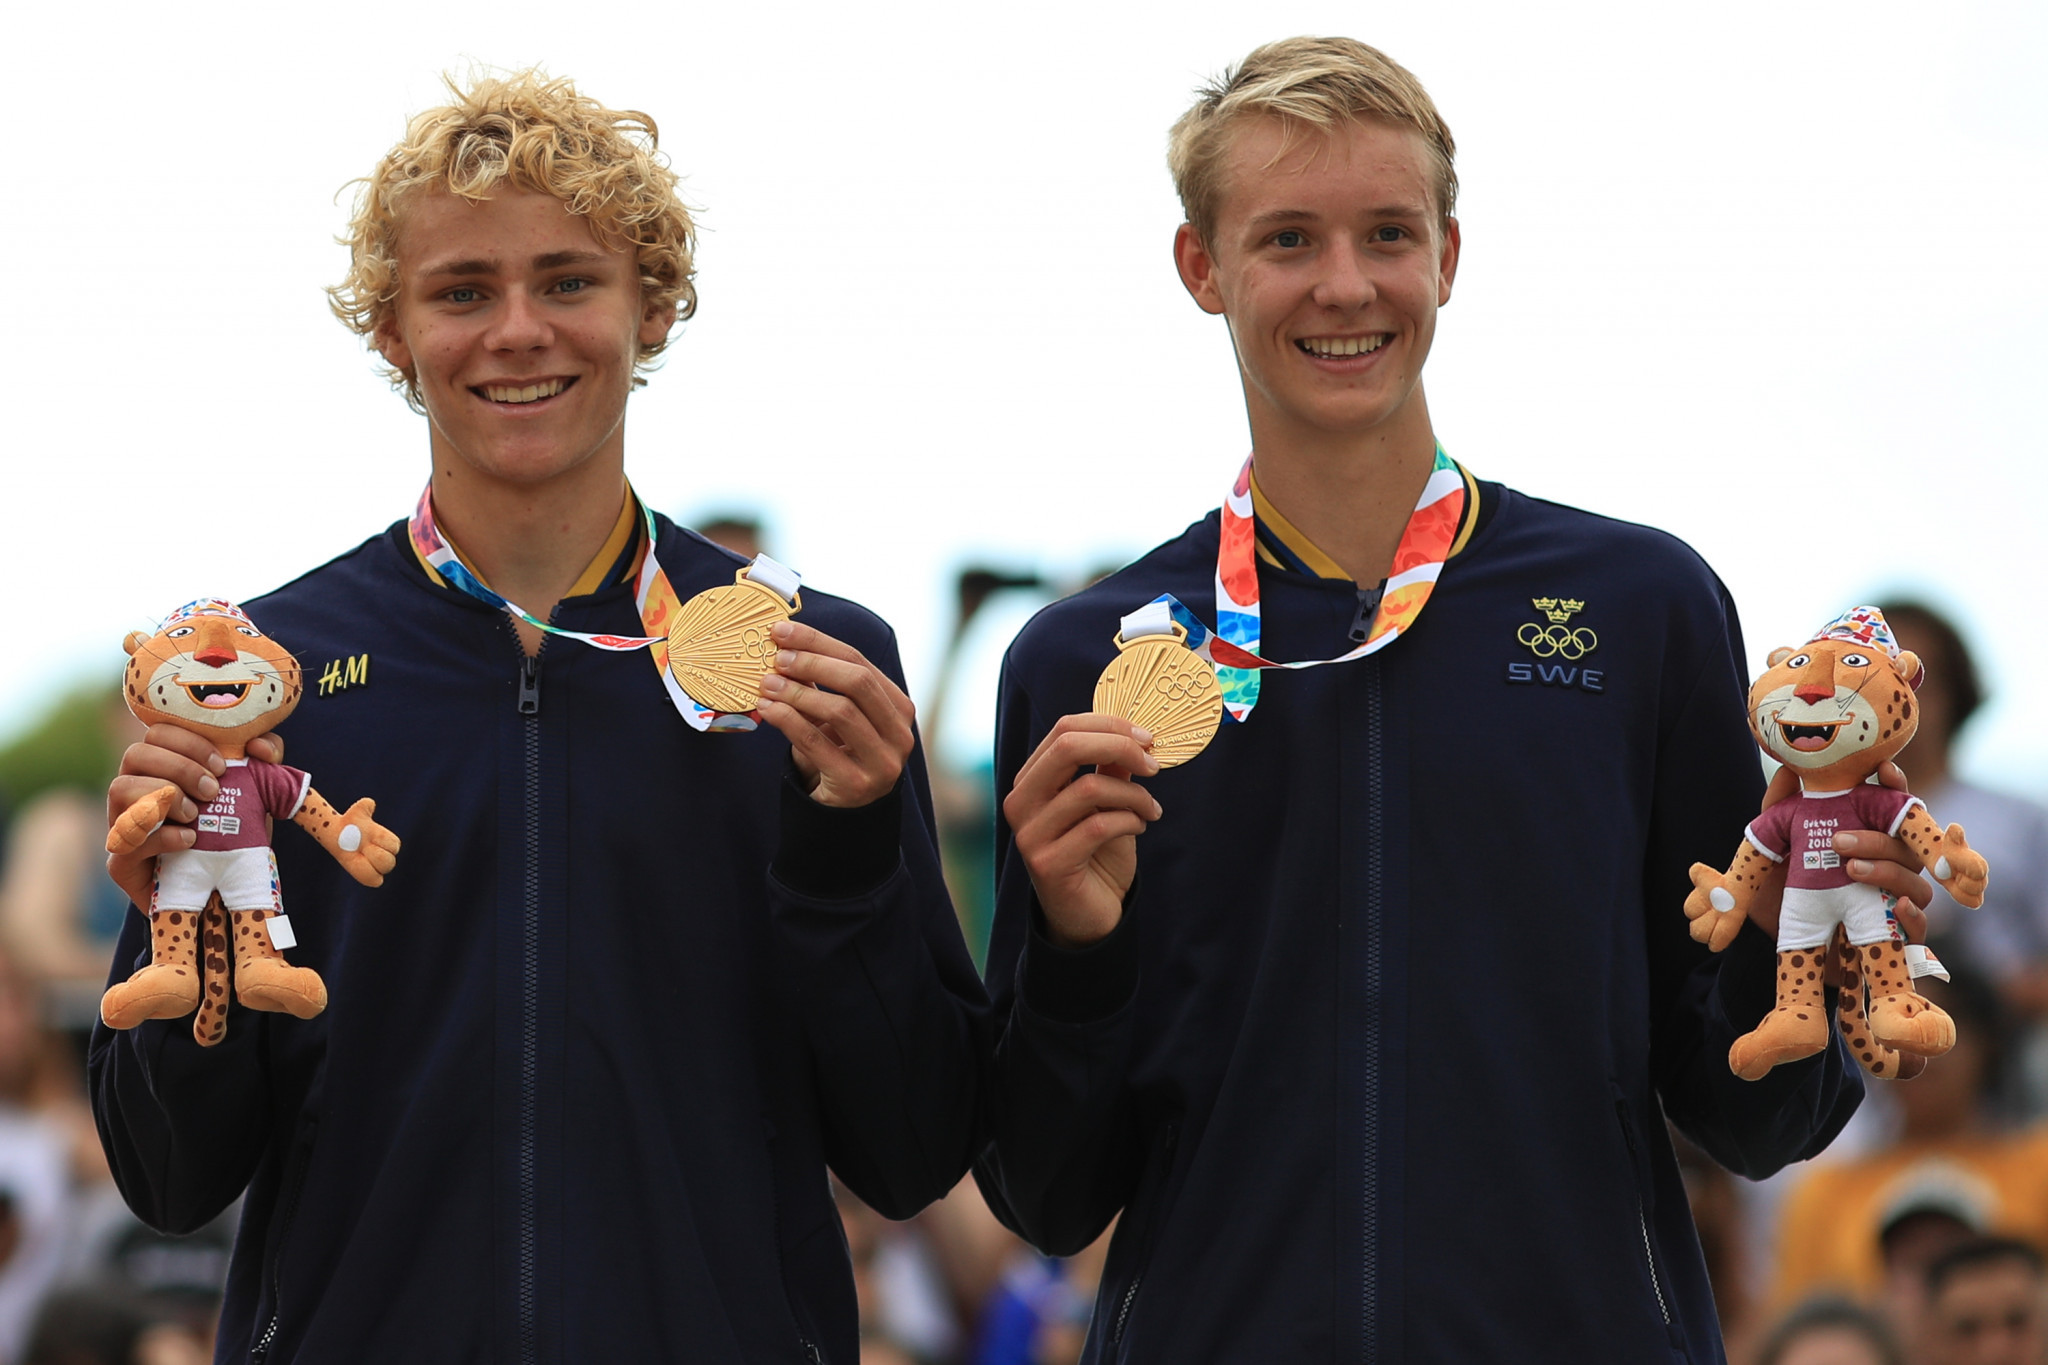 David Ahman and Jonatan Hellvig were the men's beach volleyball winners at the Buenos Aires Youth Olympic Games ©Getty Images